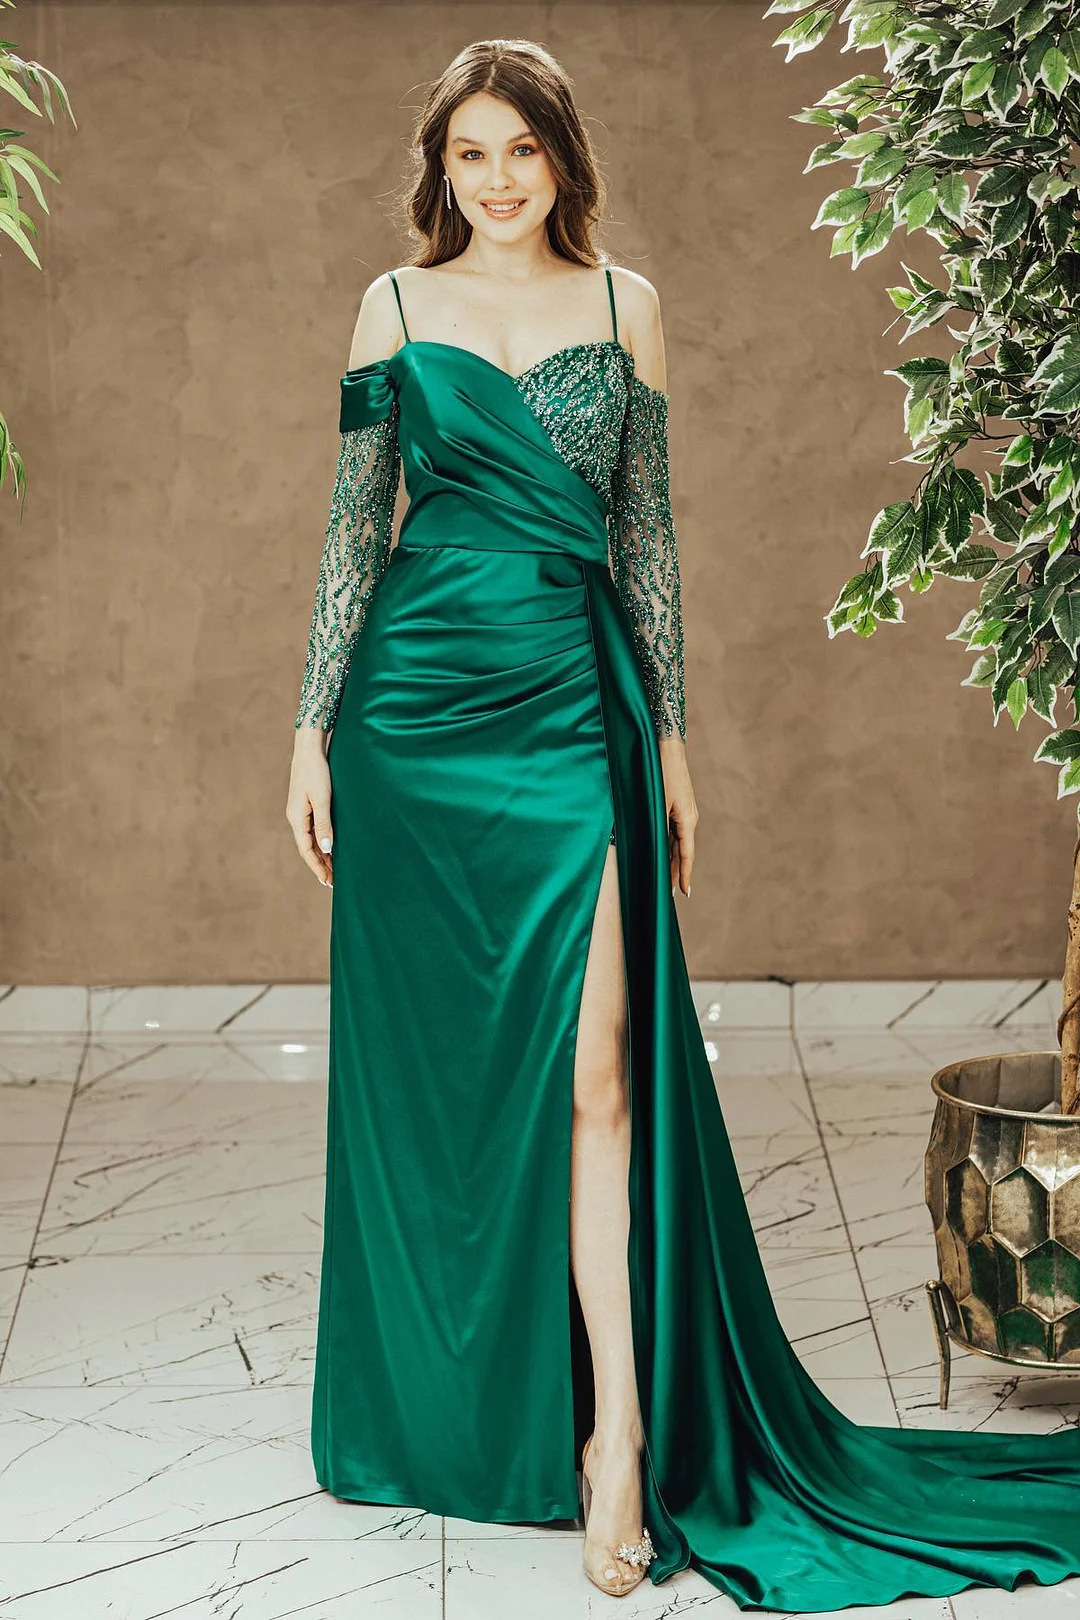 Miabel Emerald Spaghetti-Strap Off-The-Shoulder Prom Dress Sequins With Slit Pleat